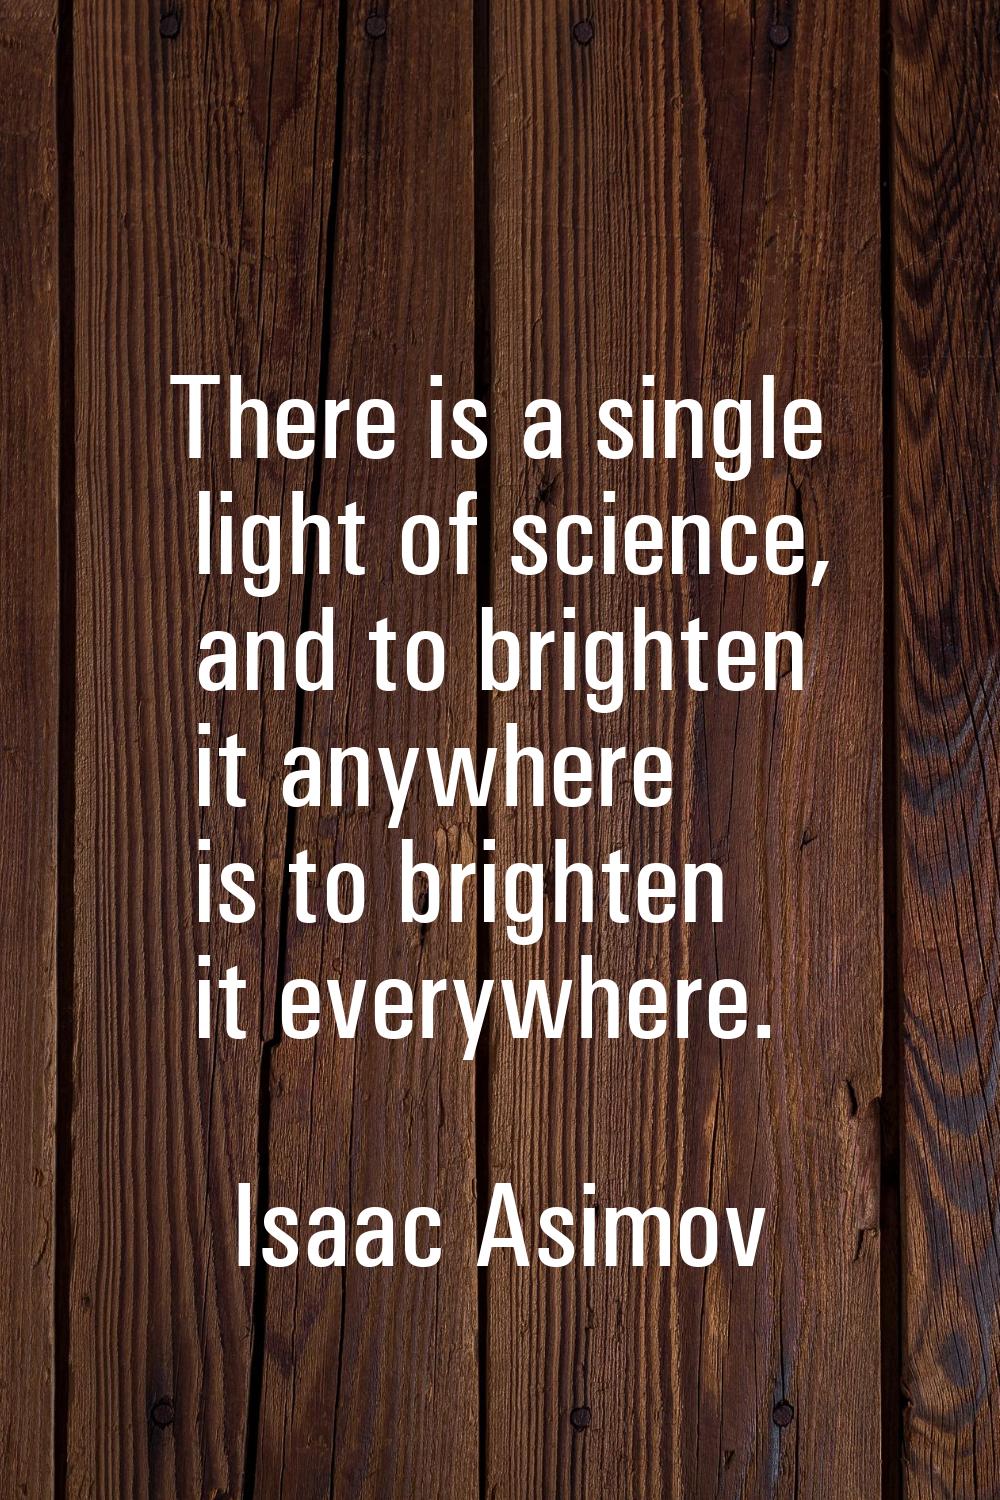 There is a single light of science, and to brighten it anywhere is to brighten it everywhere.